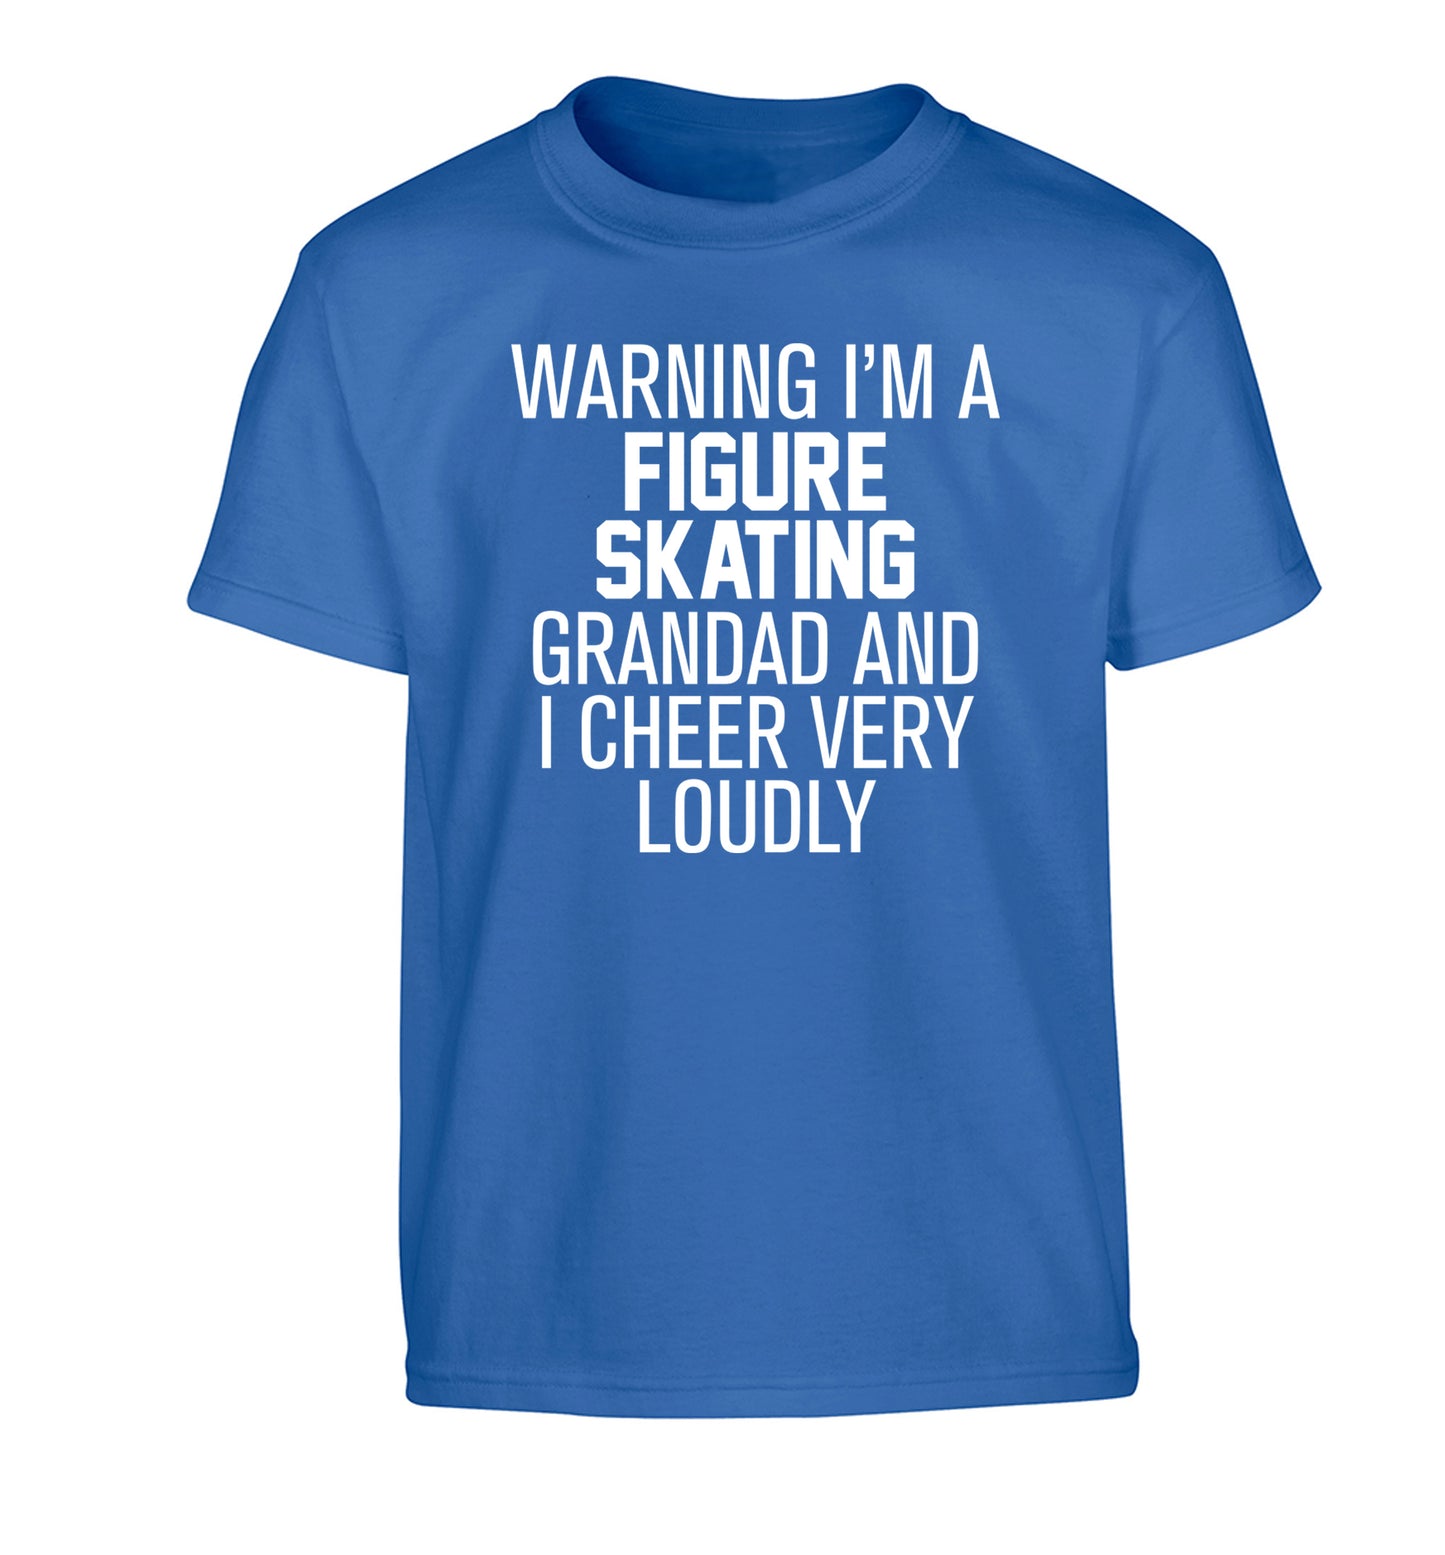 Warning I'm a figure skating grandad and I cheer very loudly Children's blue Tshirt 12-14 Years